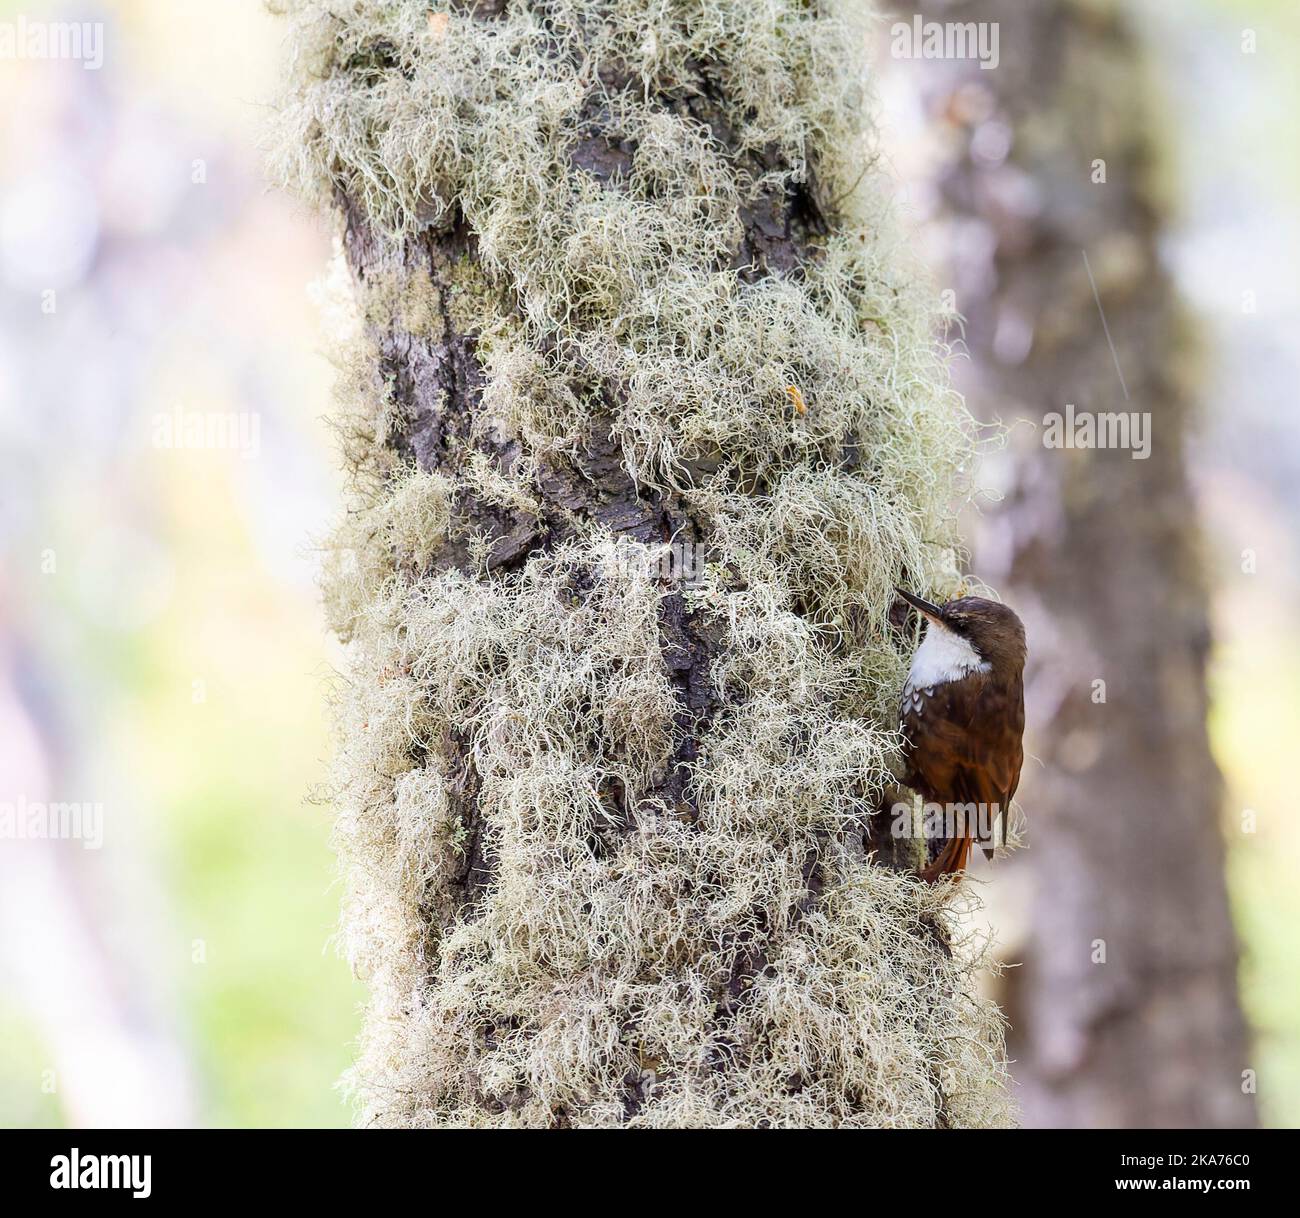 White-throated Treerunner (Pygarrhichas albogularis) in Patagonia forest, Tierra del Fuego, southern Argentina. Stock Photo